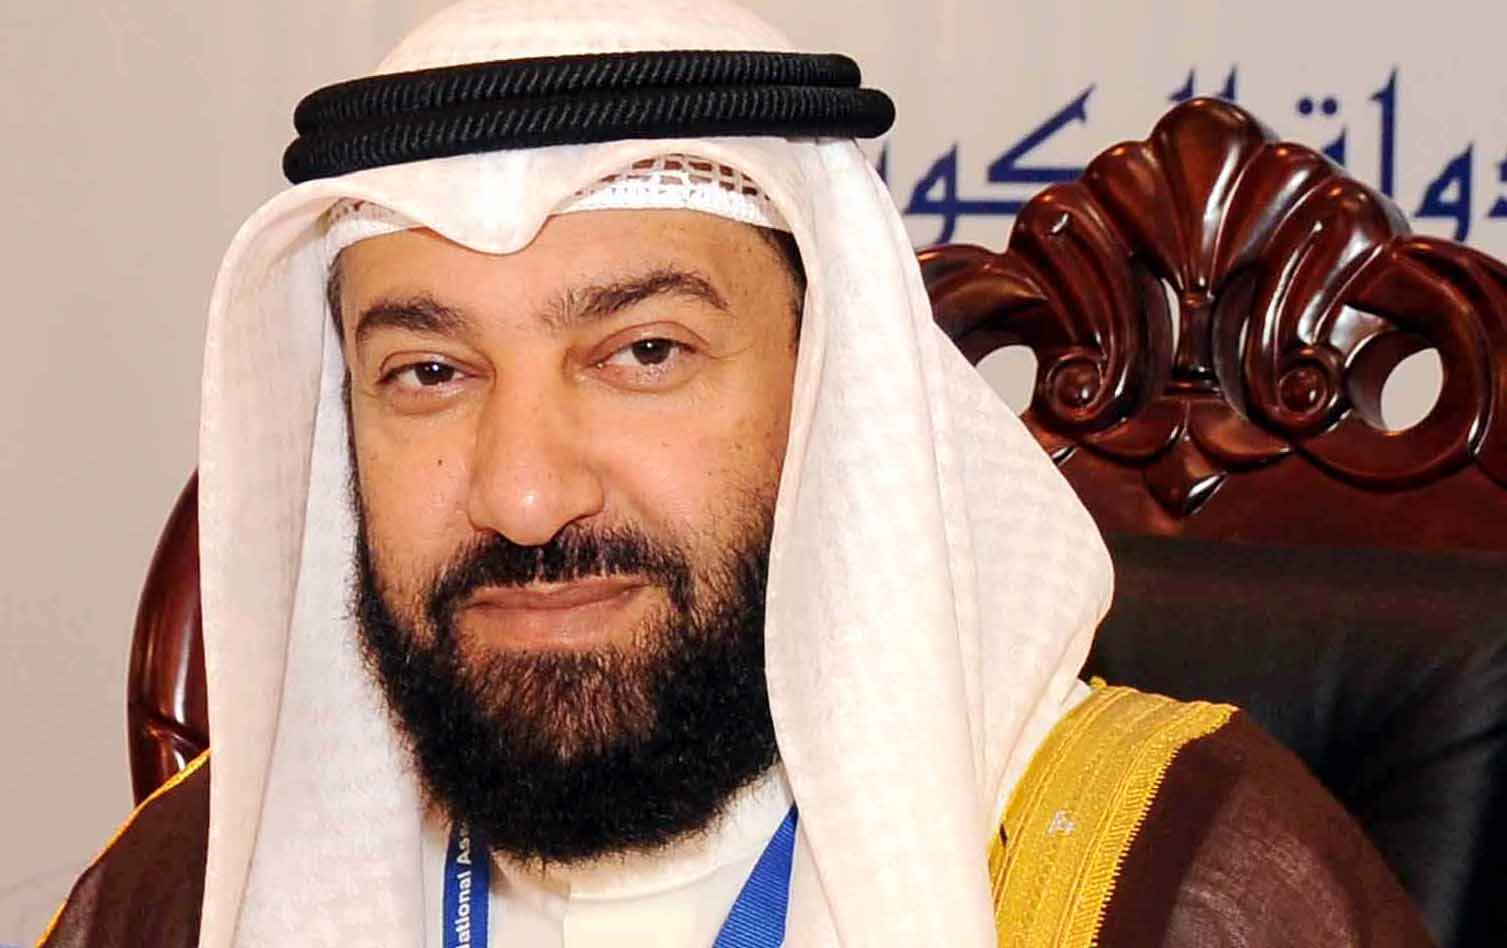 Kuwaiti Minister of Oil and Minister of State for National Assembly Affairs Ali Al-Omair